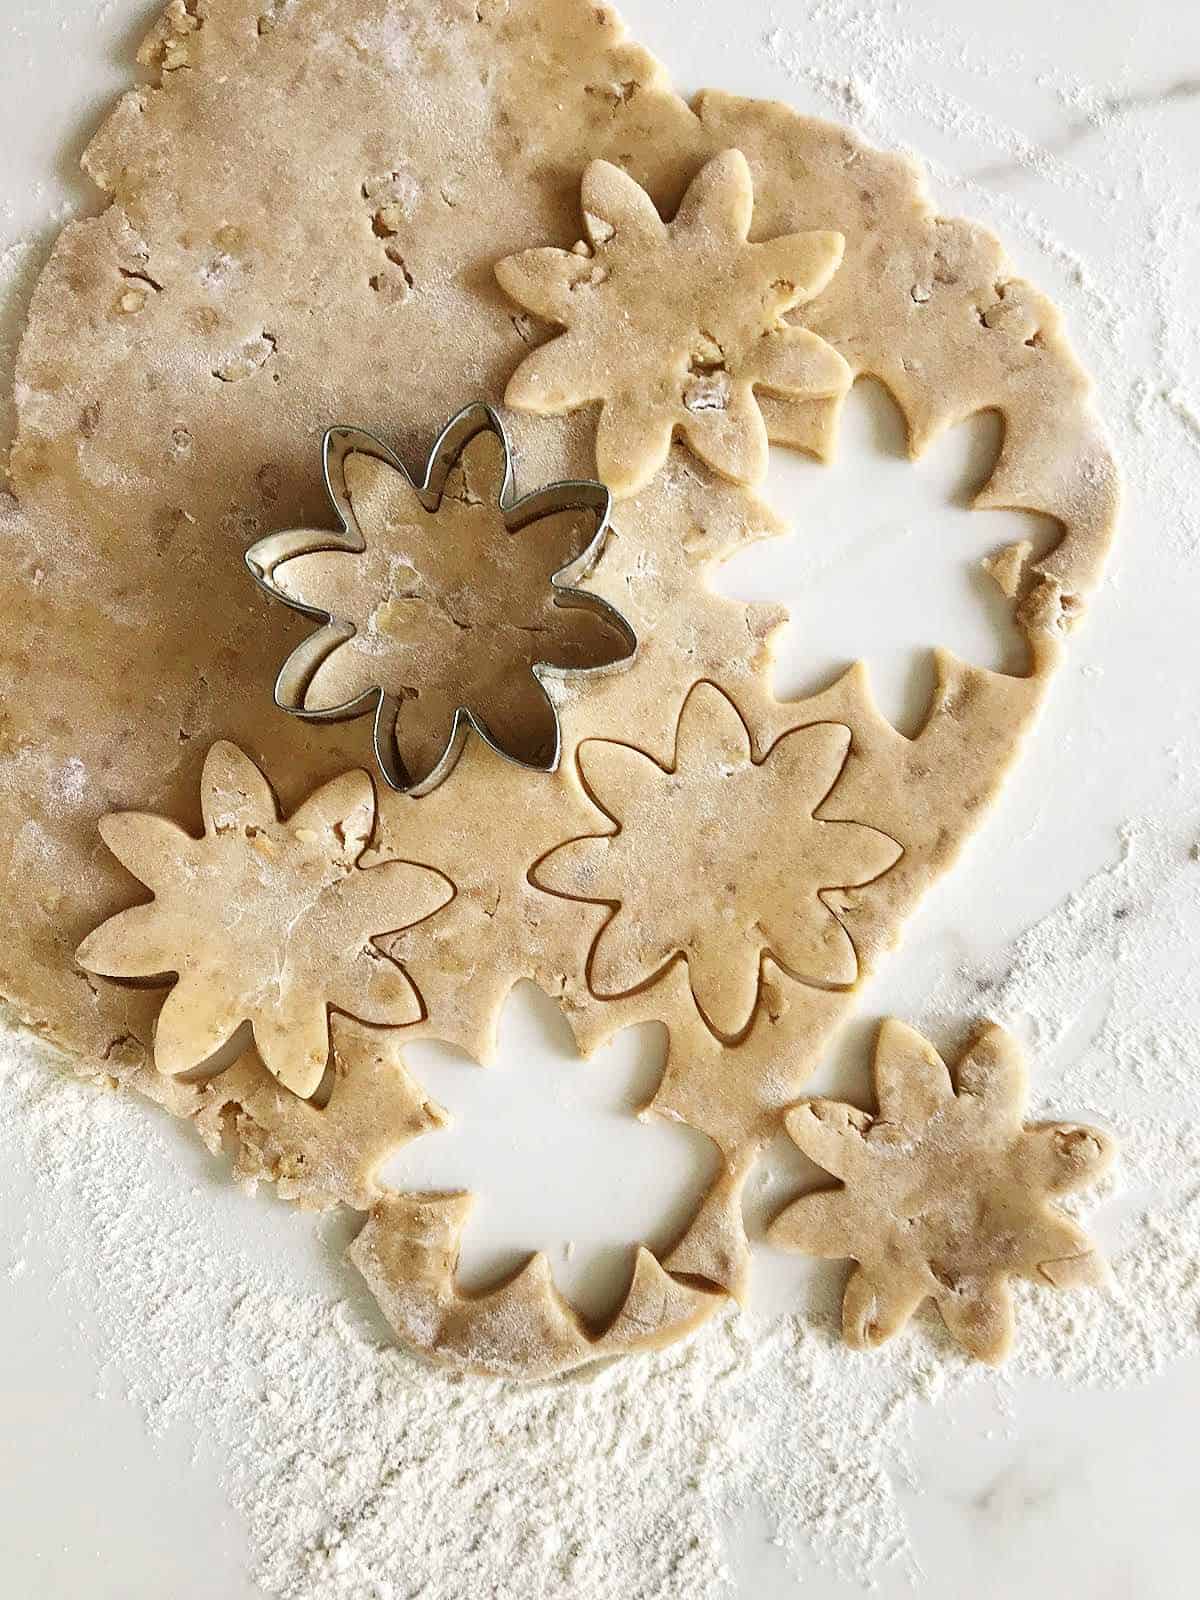 Rolled cinnamon dough cut into flowers, cookie cutter, white marble surface